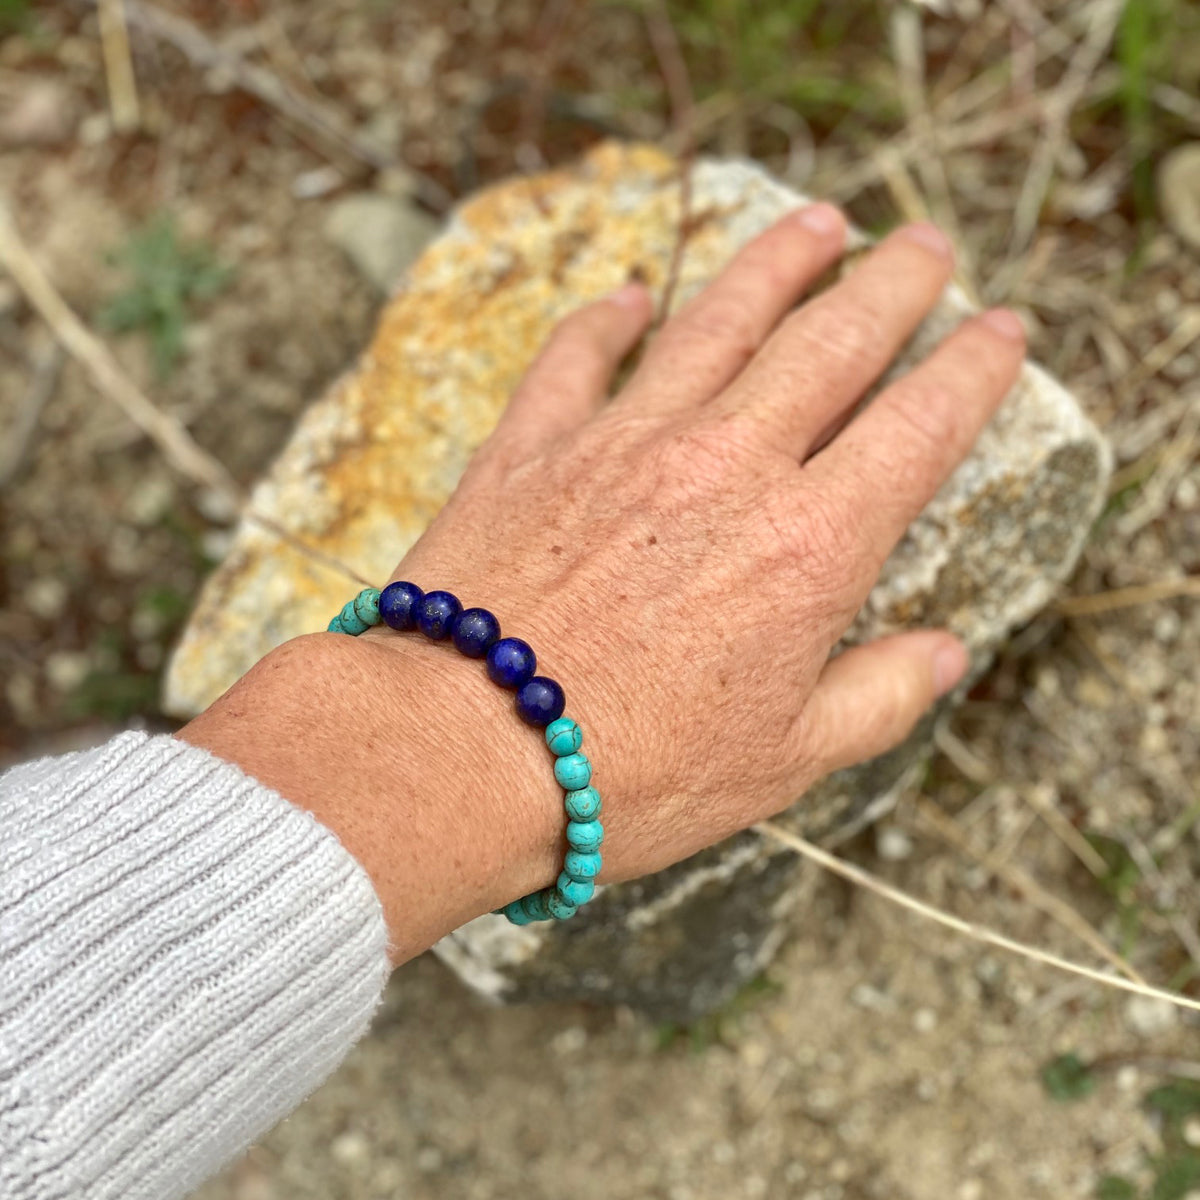 Ocean Planet - Blue Marble Gratitude Bracelet with Lapis Lazuli Earth Symbol Pendant on a Turquoise Howlite Mala Bracelet. "You are not a drop in the ocean, you are the entire ocean in a drop." – Rumi Lapis Lazuli is known as the water stone, so you can easily assume its elemental affinity. 